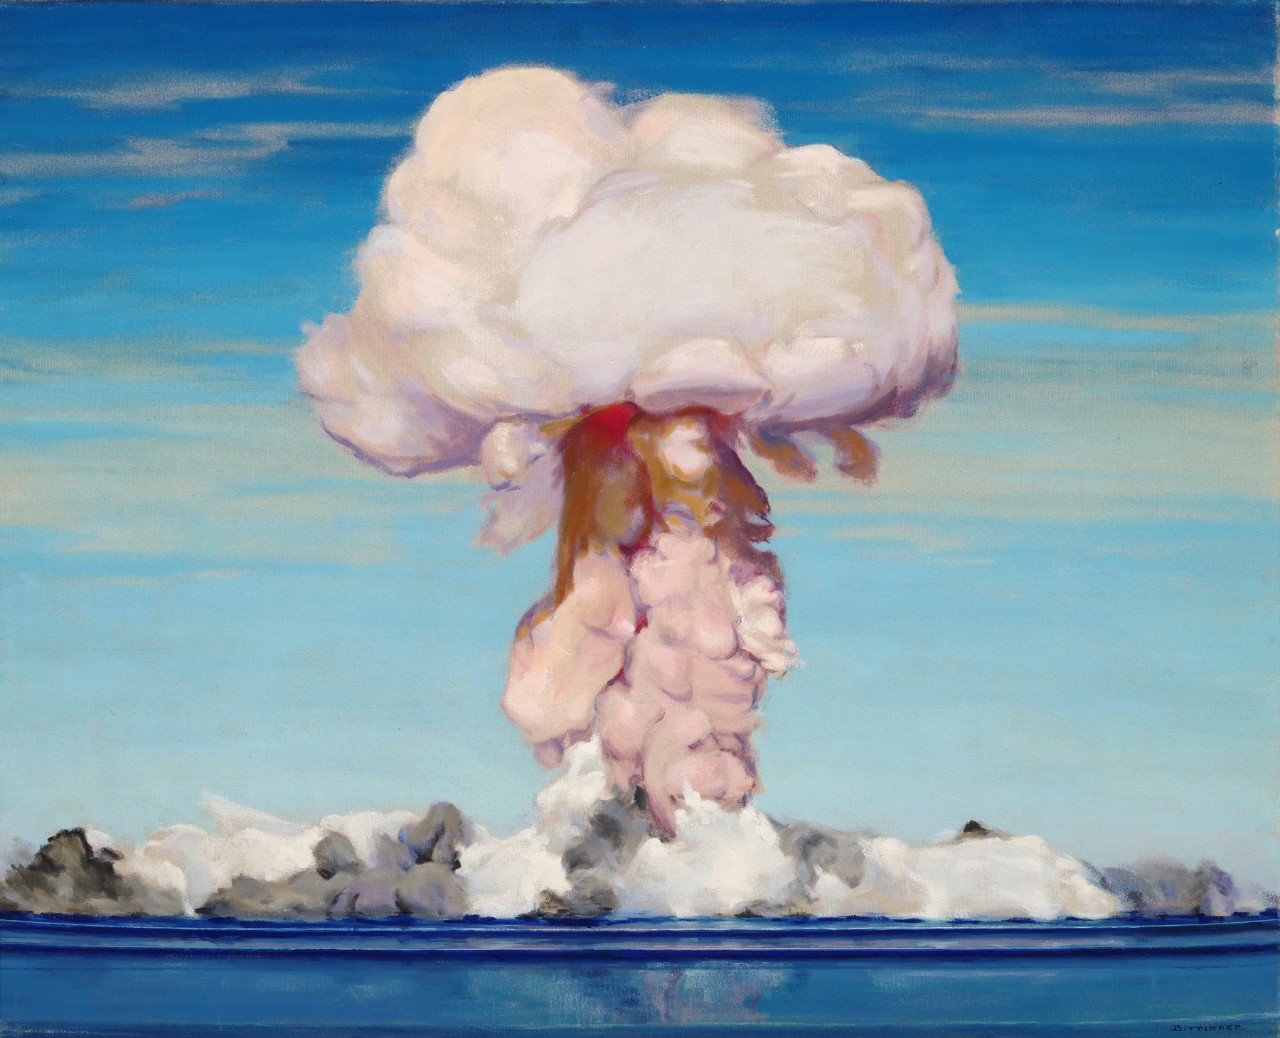 A pink mushroom cloud rises from the lagoon